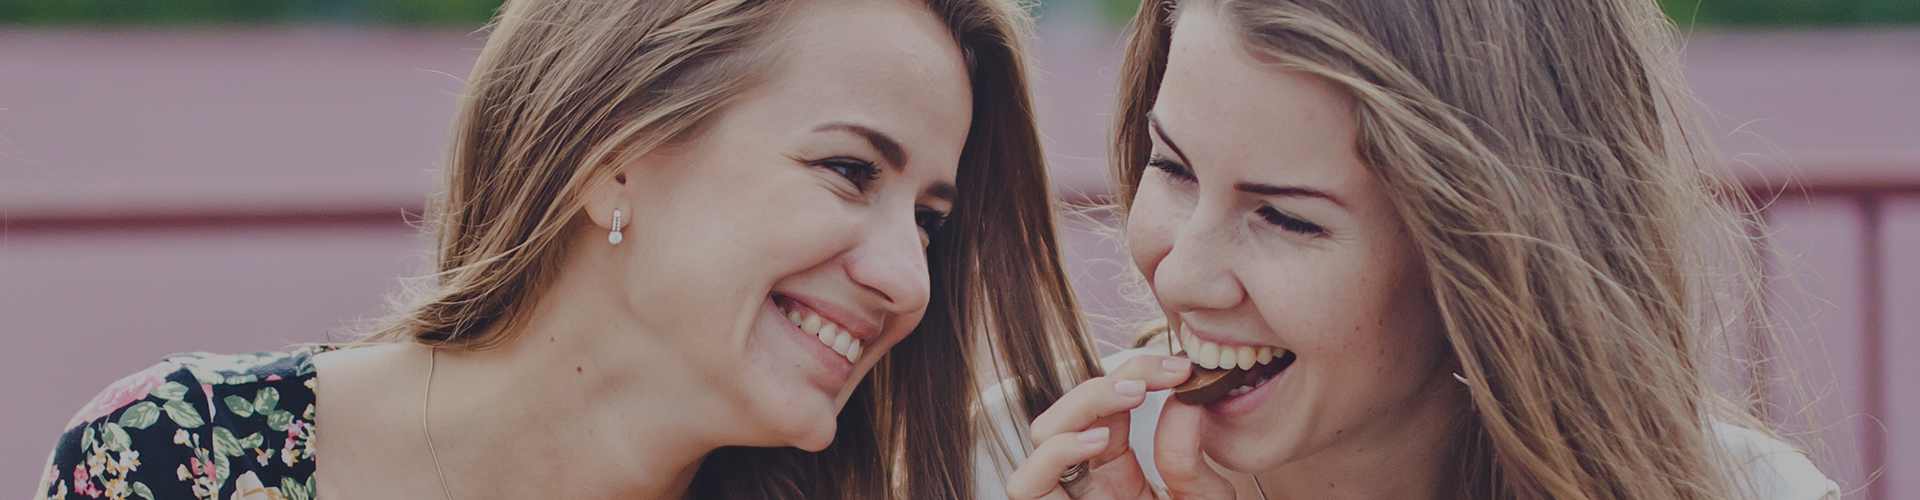 Two adult women with white teeth smiling while eating chocolate